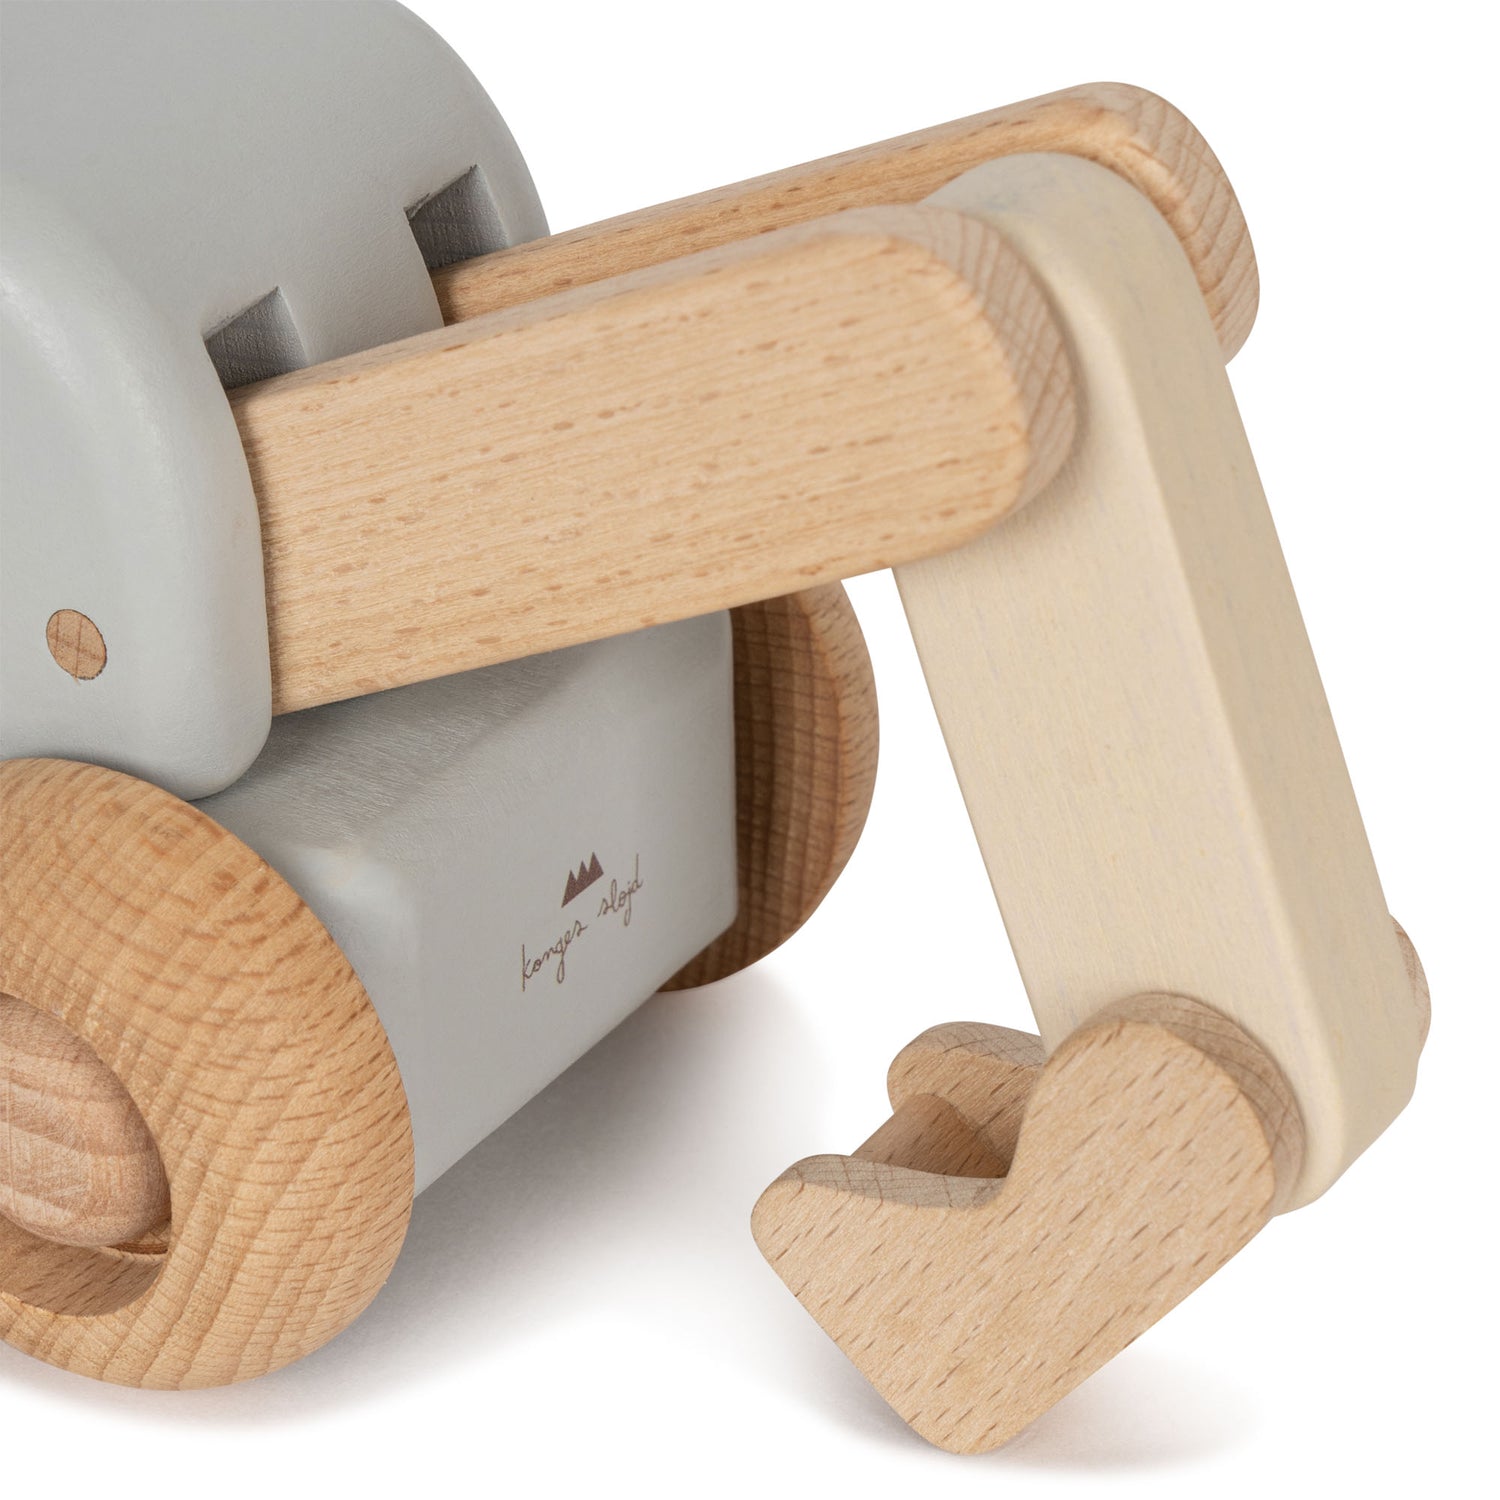 Wooden Toy Digger by Konges Sløjd (SMALL DEFECT/DAMAGE)